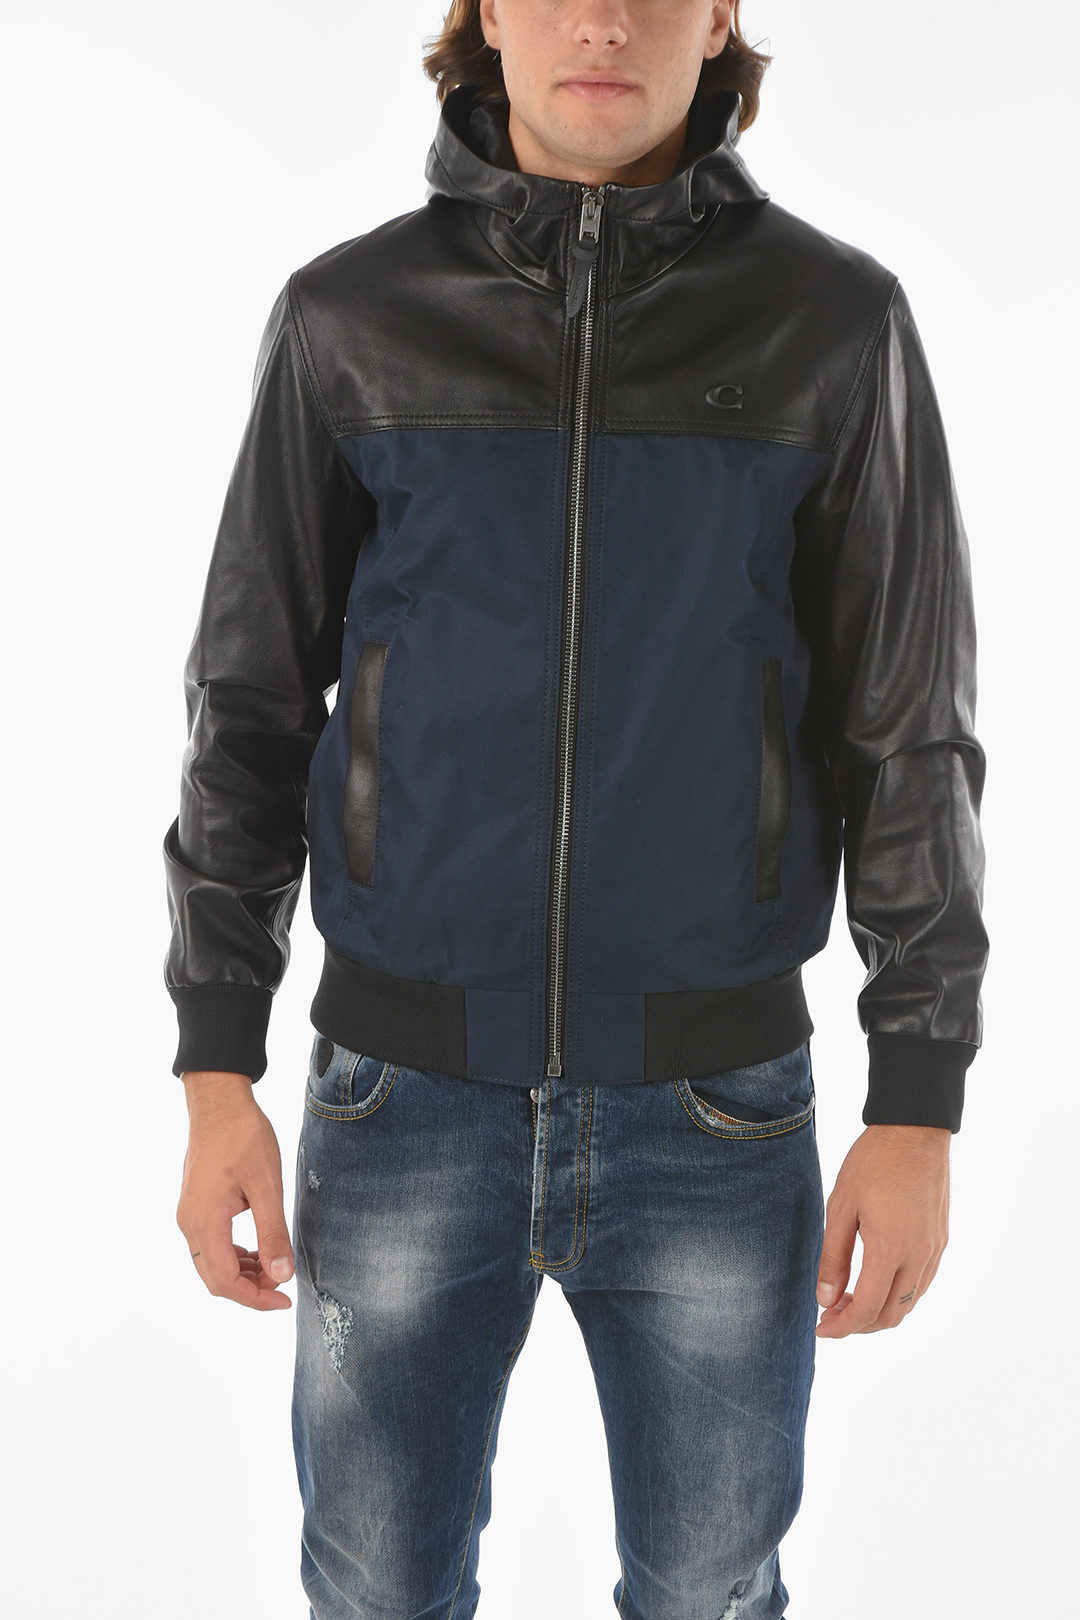 Coach Leather Two-Tone Jacket with Hood men - Glamood Outlet